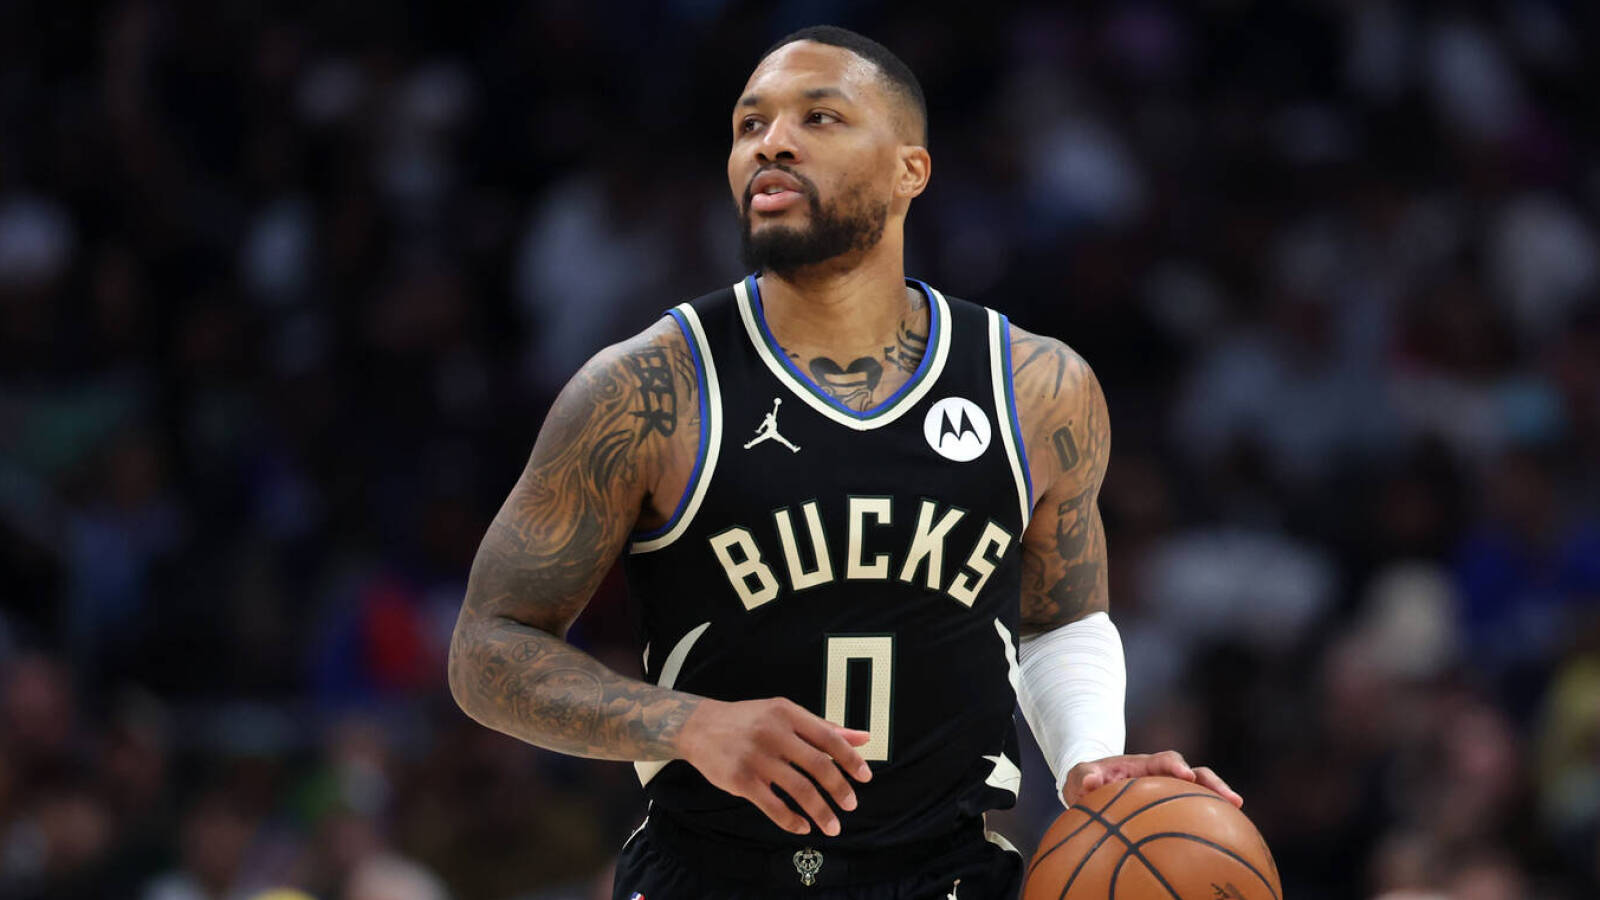 Watch: Damian Lillard scores 16 points in fourth quarter as Bucks hold off Clippers